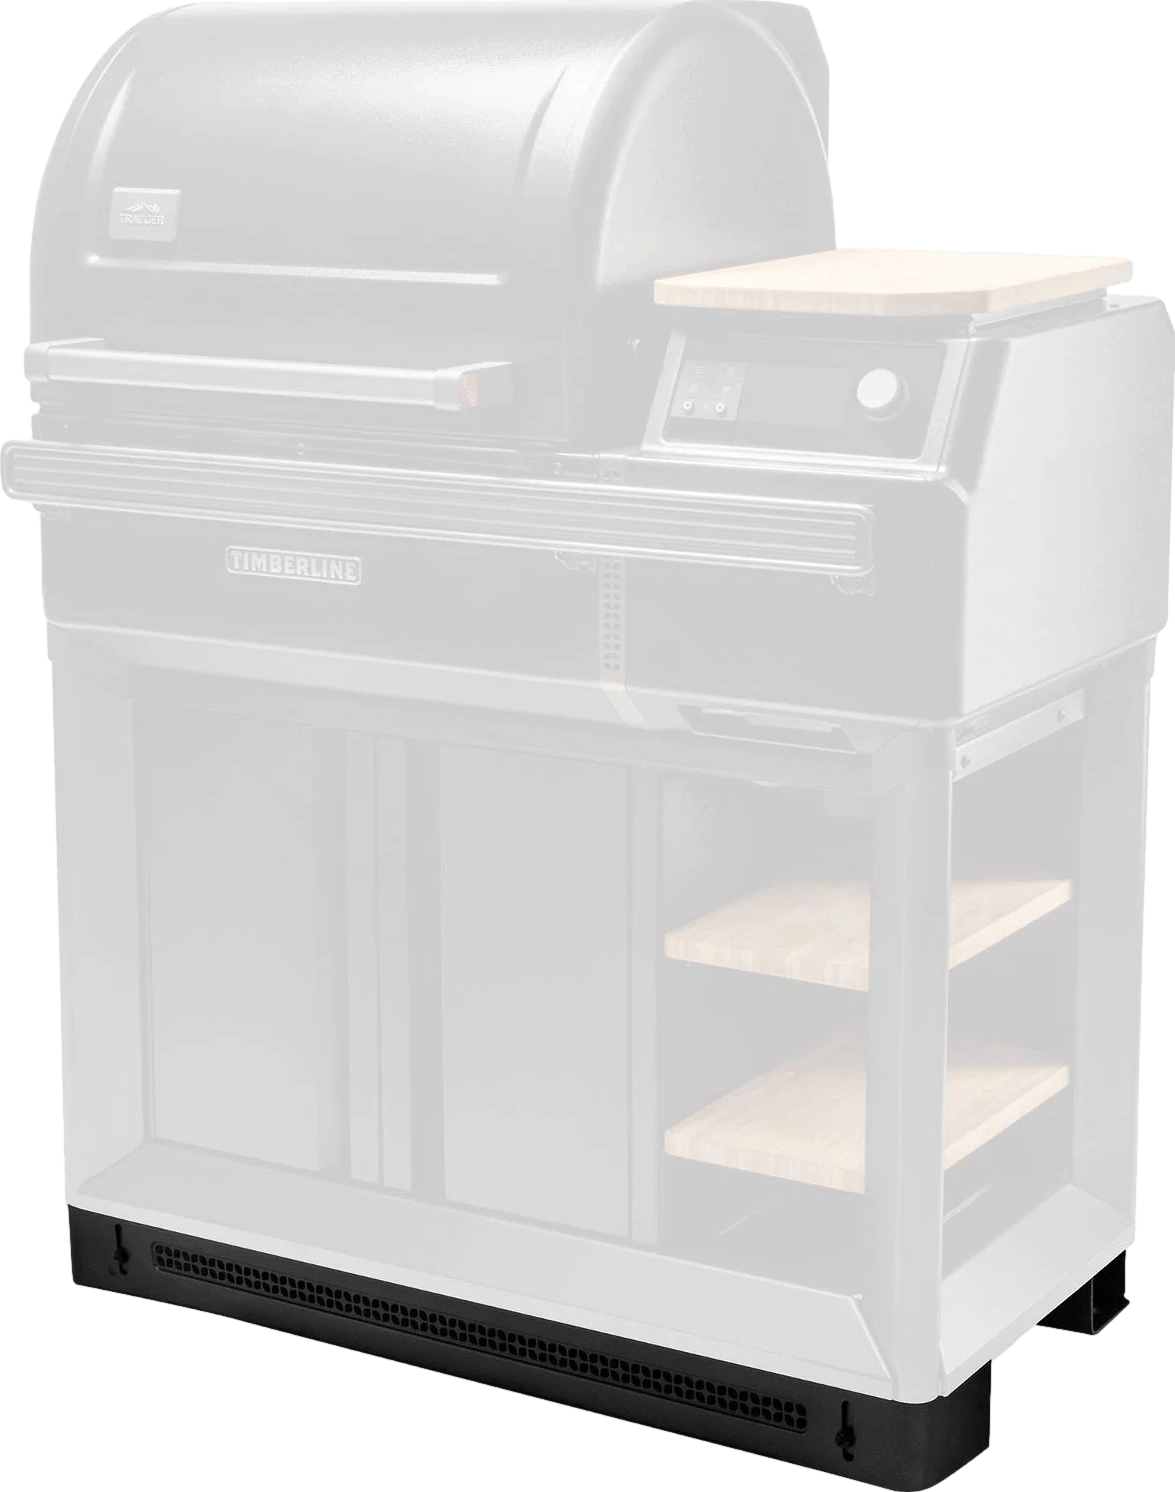 Traeger Built-In Trim Kit for Timberline